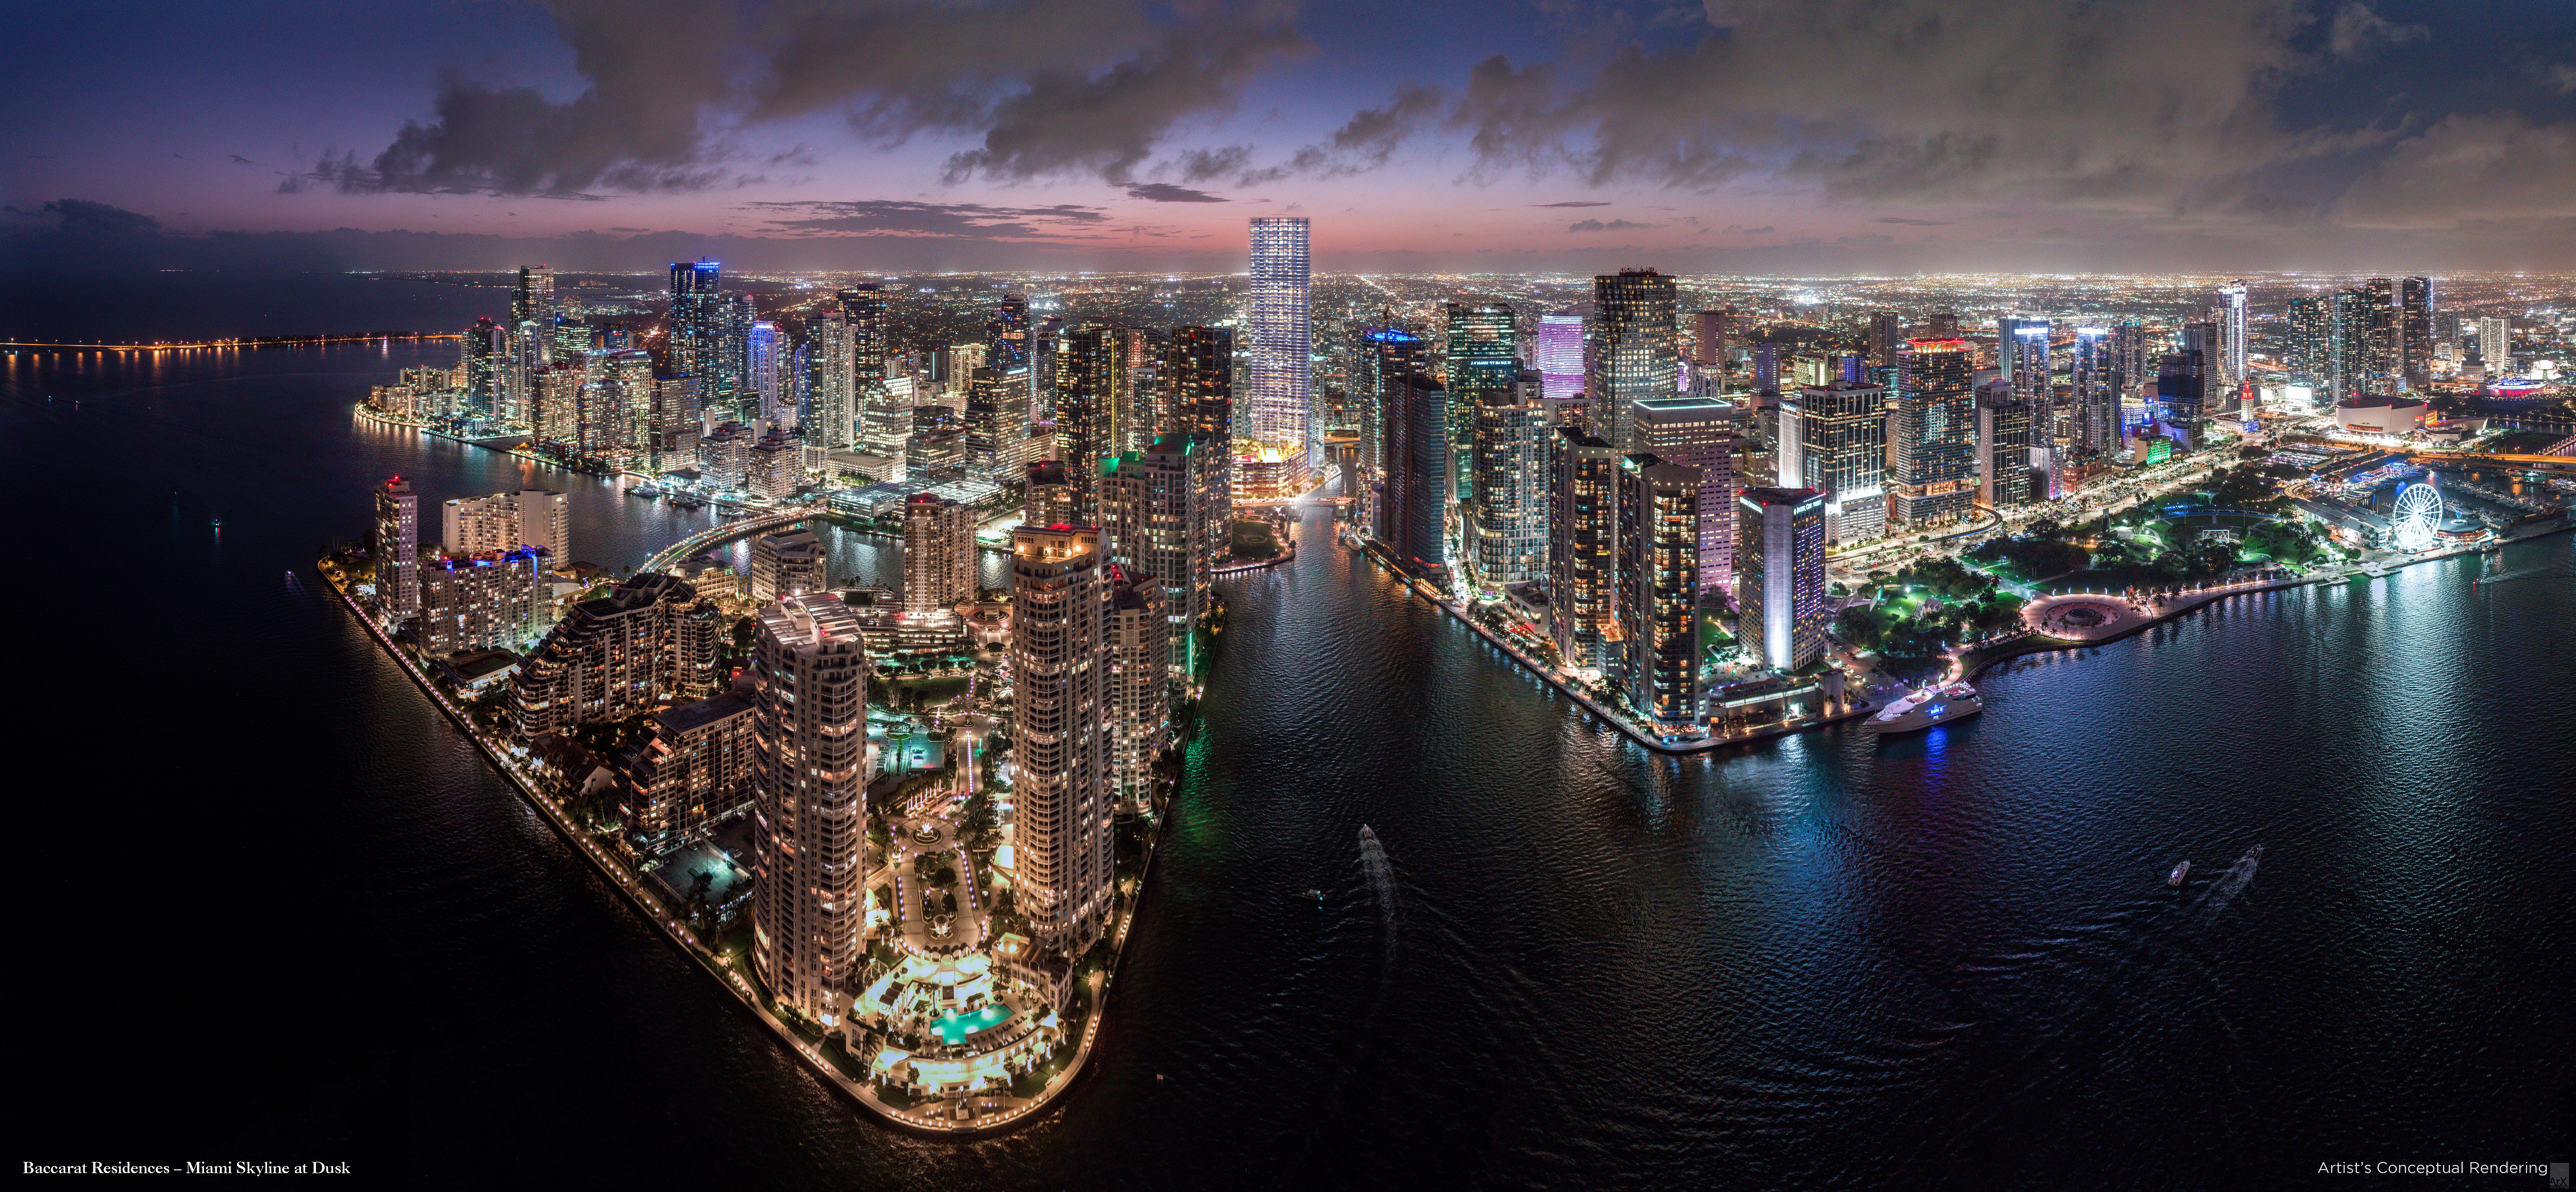 Brickell Has Been Named One of the 49 Coolest Neighborhoods in the WORLD